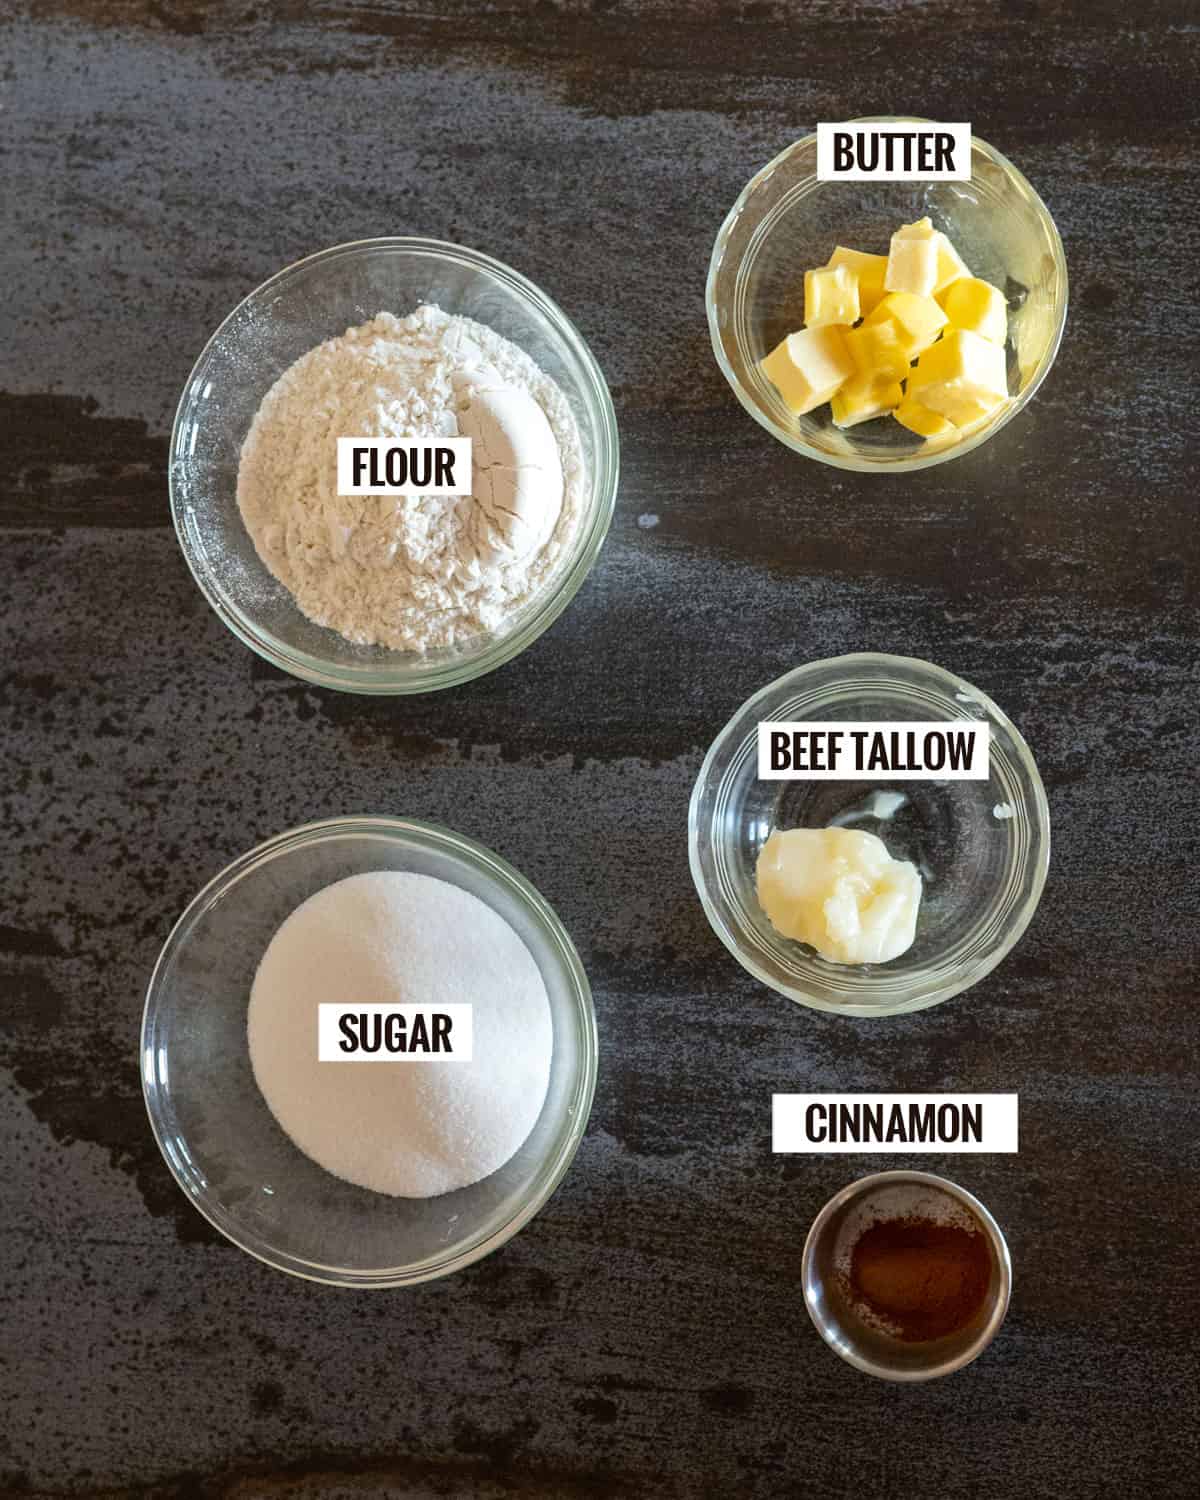 crumble topping ingredients: flour, butter, sugar, beef tallow, cinnamon.